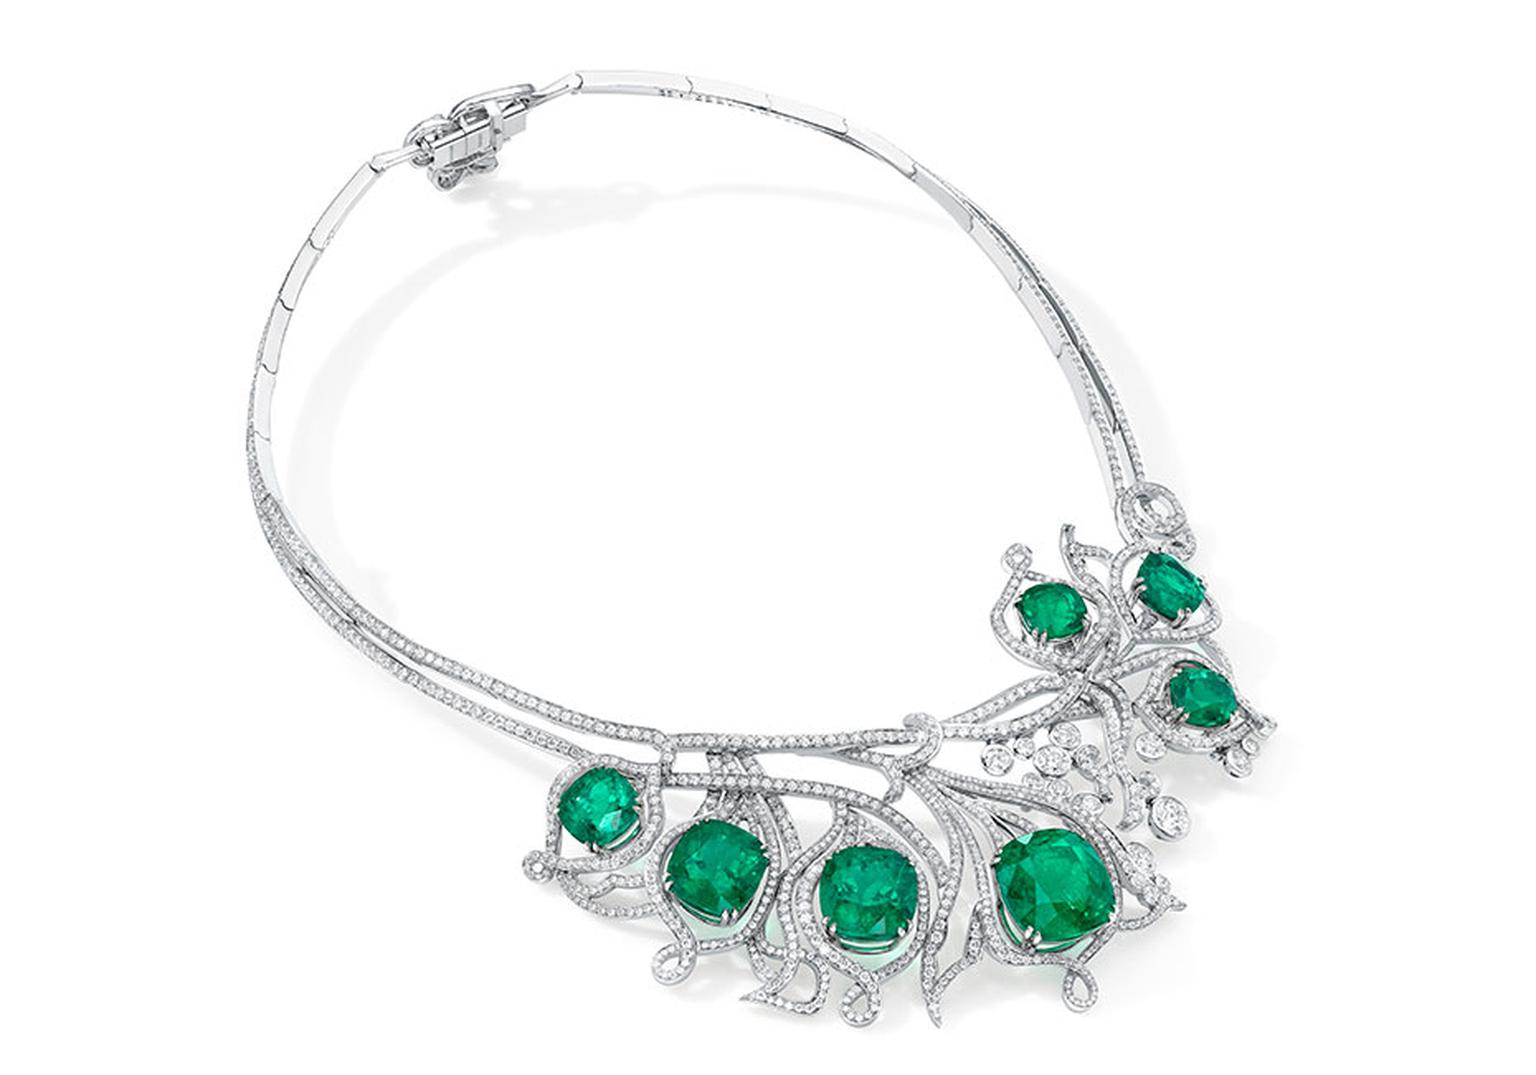 Boodles' Emerald Greenfire necklace is set with 46.20ct of cushion-cut emeralds and 17.38ct of brilliant-cut diamonds